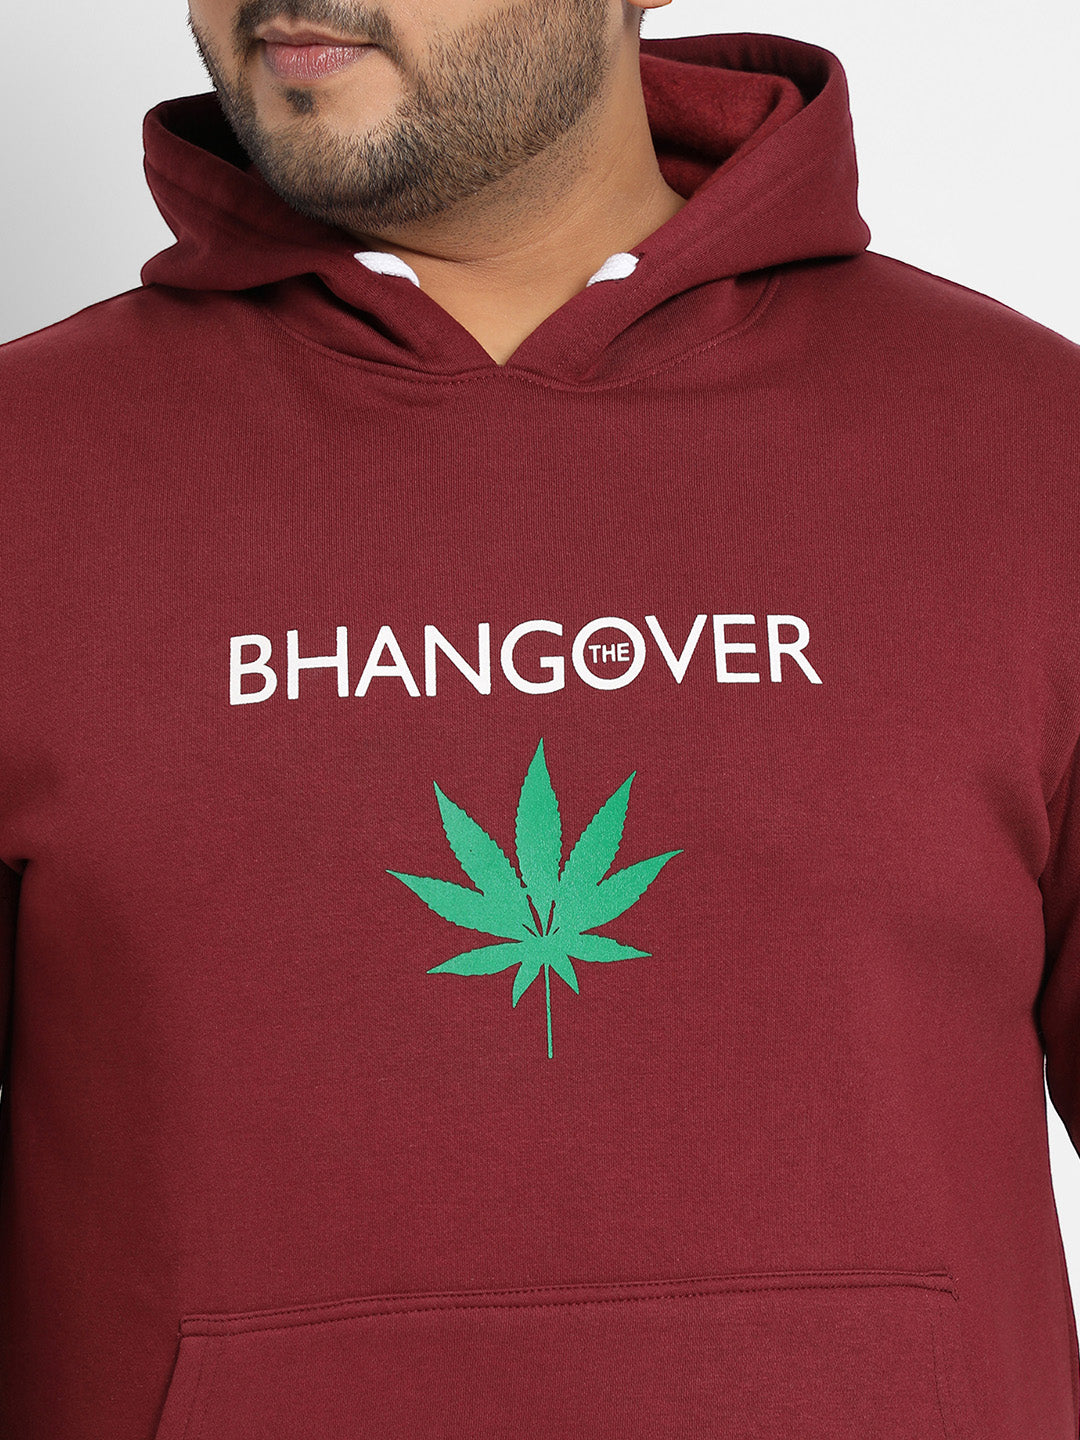 Plus Size Men's Maroon Red Bhangover Hoodie With Kangaroo Pocket